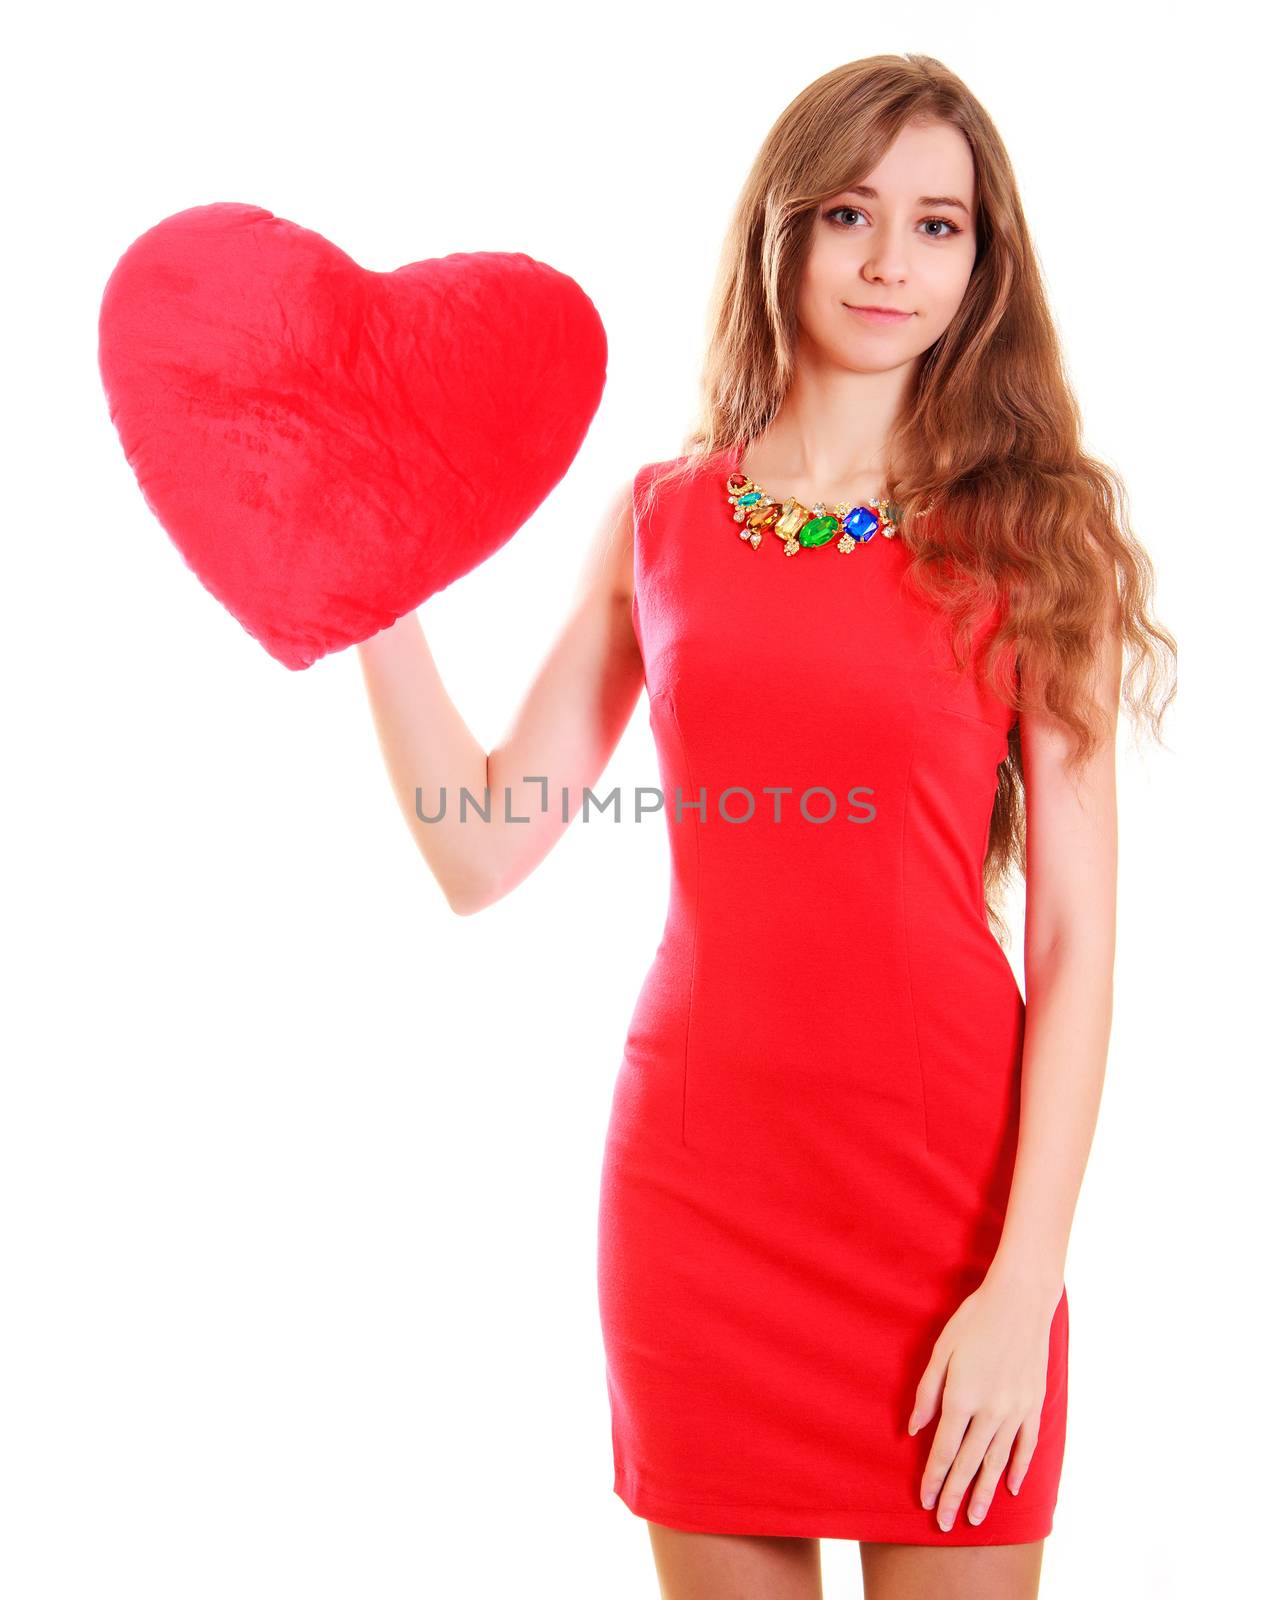 Portrait of a young attractive woman with a heart-shaped pillow isolated over white background